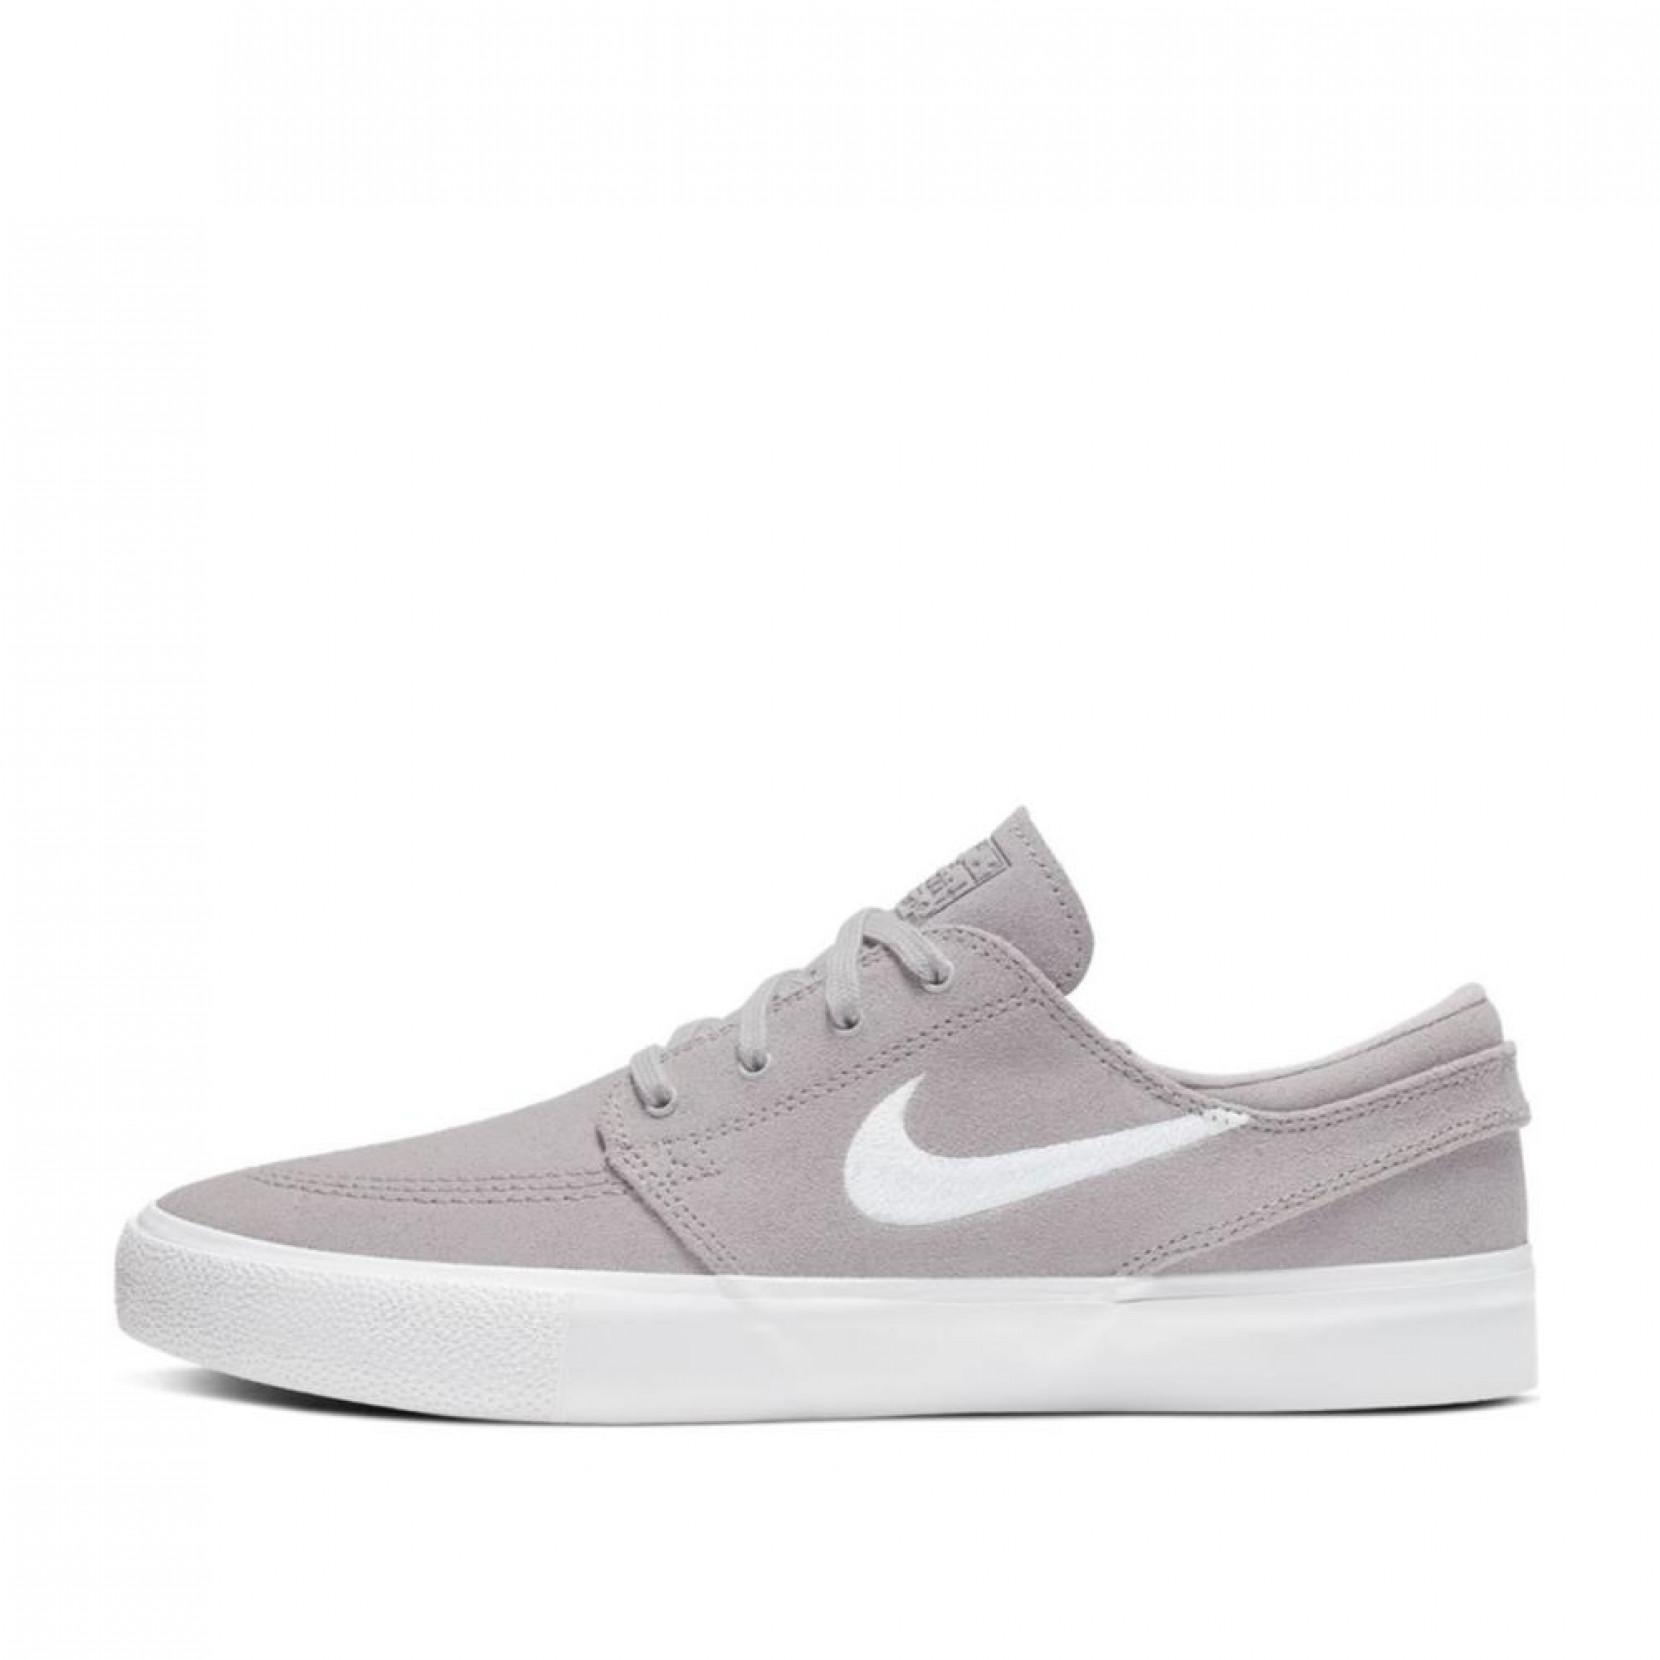 Nike Suede Zoom Janoski Rm In Grey Gray For Men Save 29 Lyst